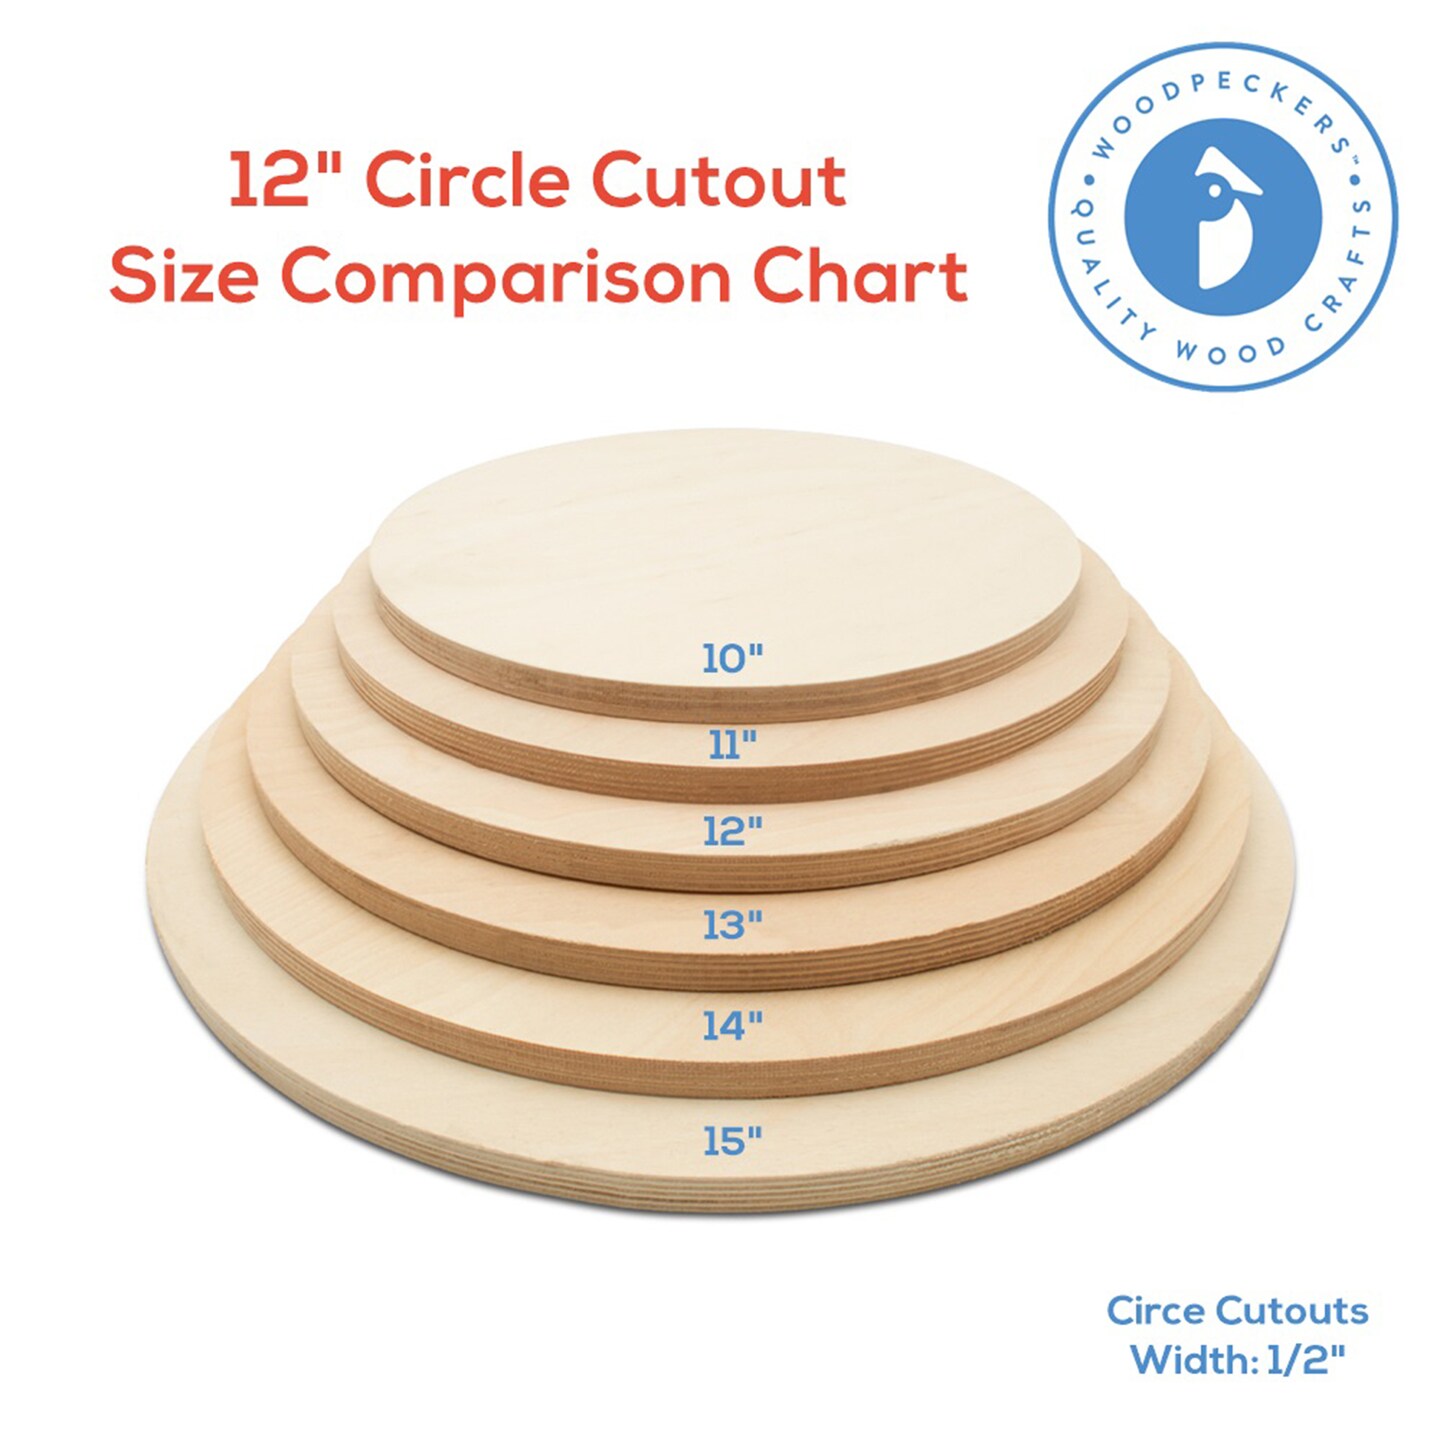 Wood Circles 12 inch, 1/8 inch Thick, Birch Plywood Discs, Pack of 5 Unfinished Wood Circles for Crafts, Wood Rounds by Woodpeckers